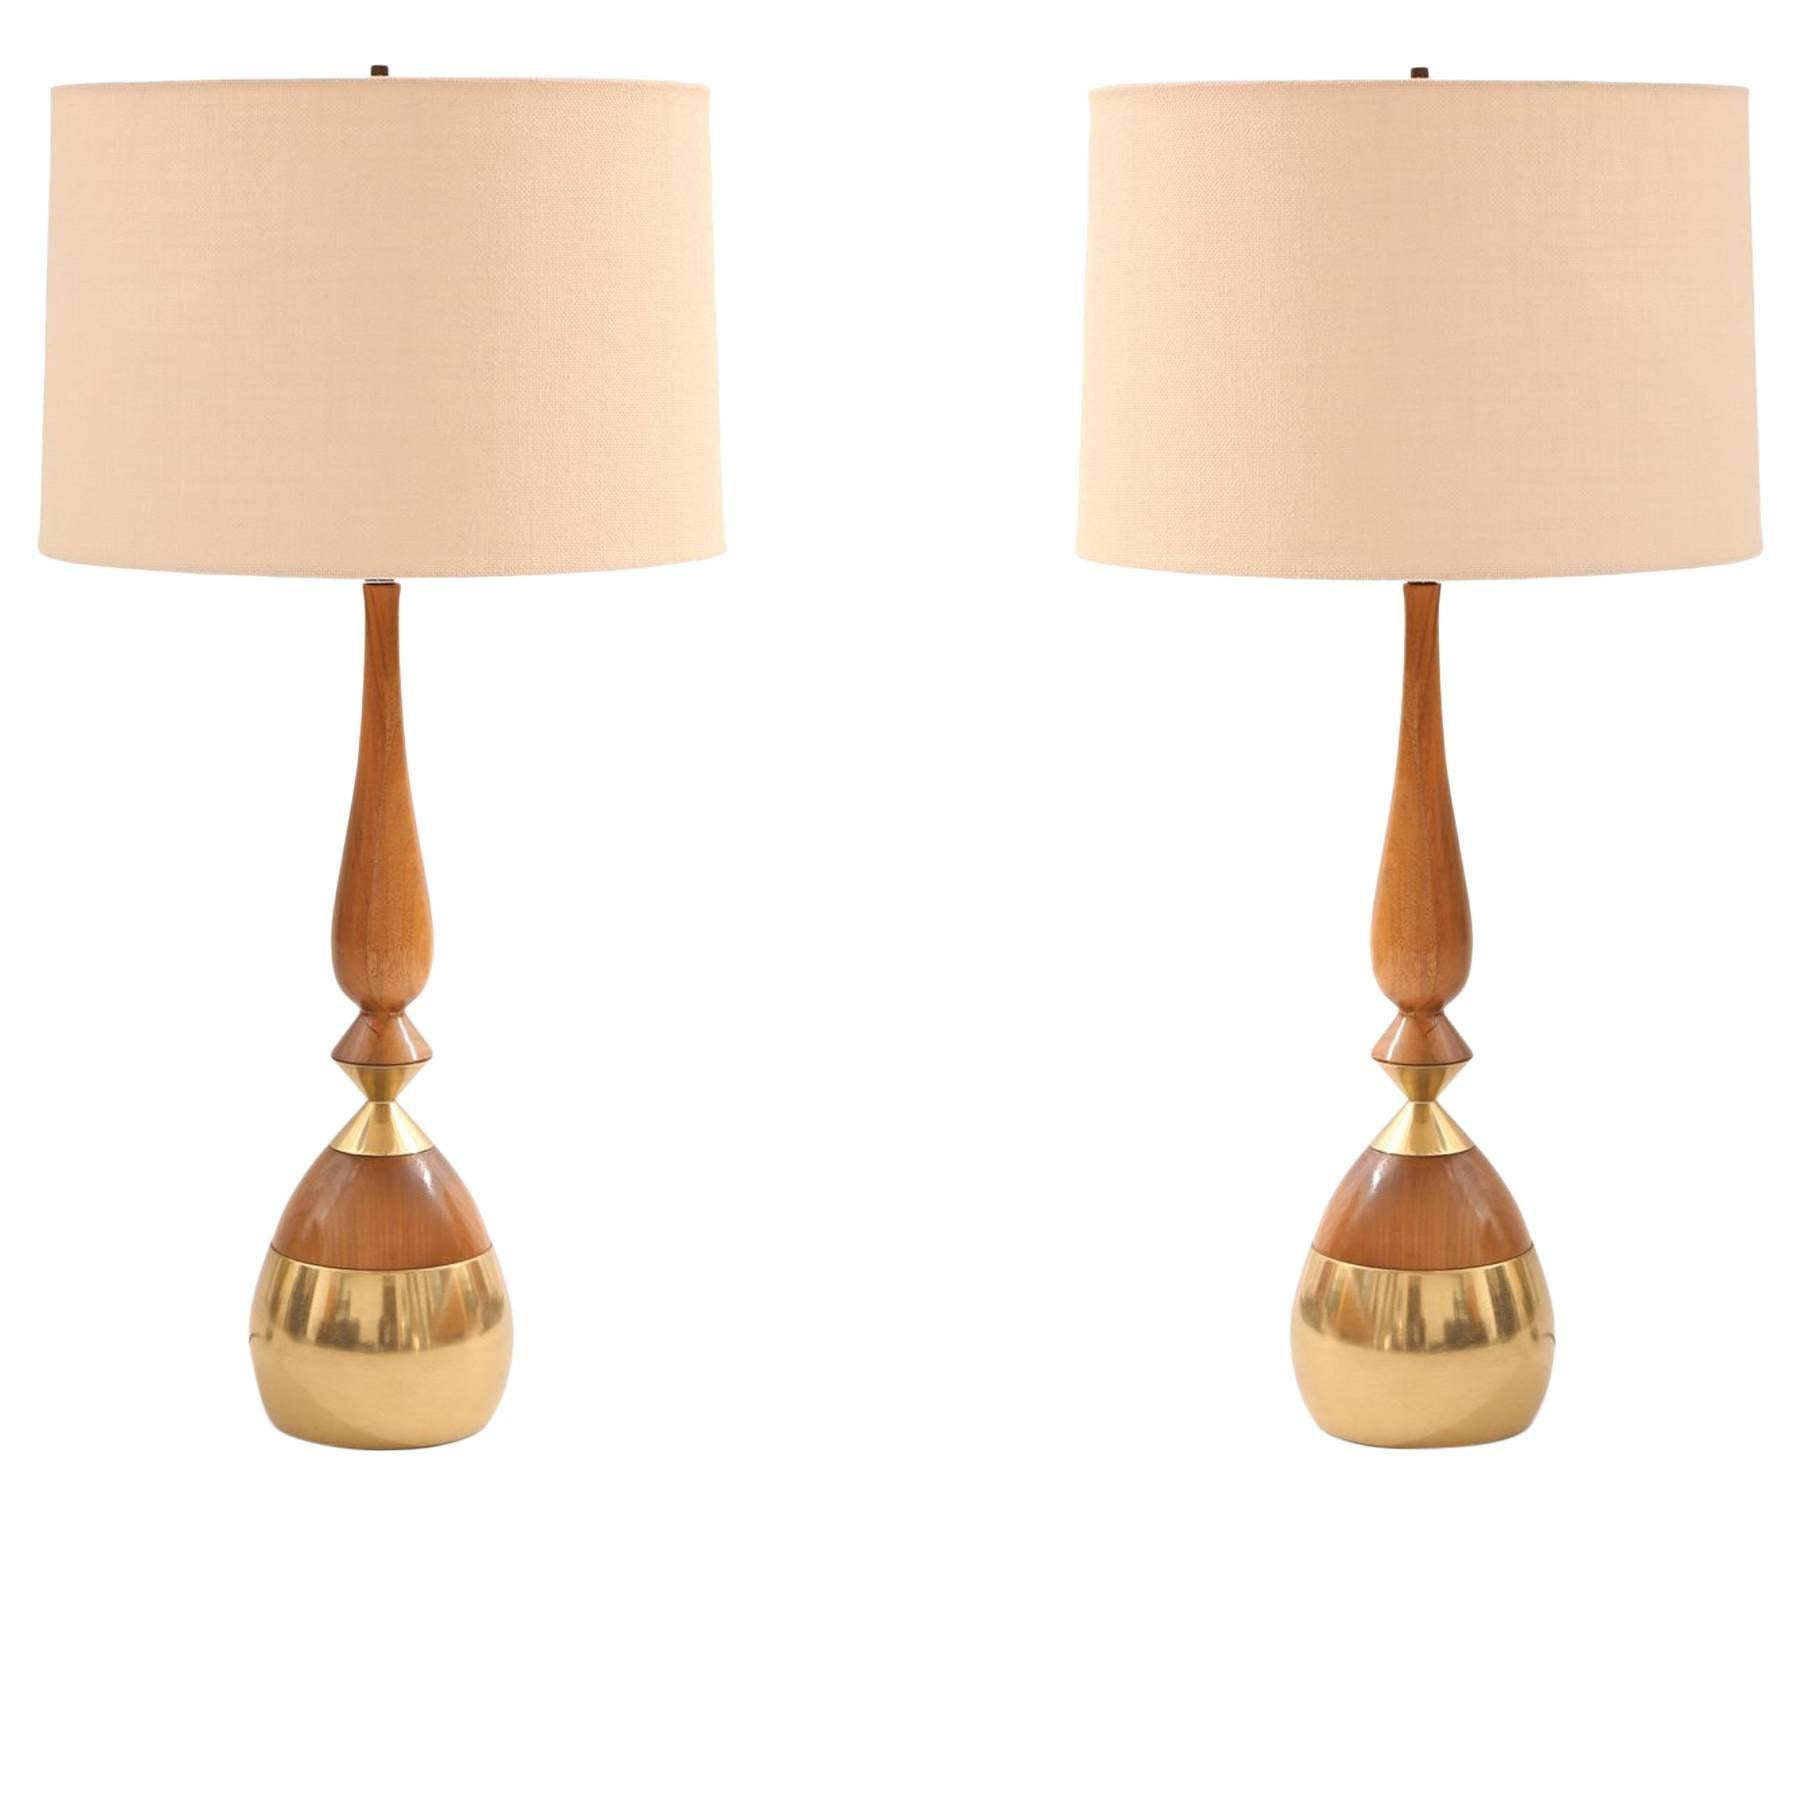 Tony Paul for Westwood Brass and Walnut Lamps